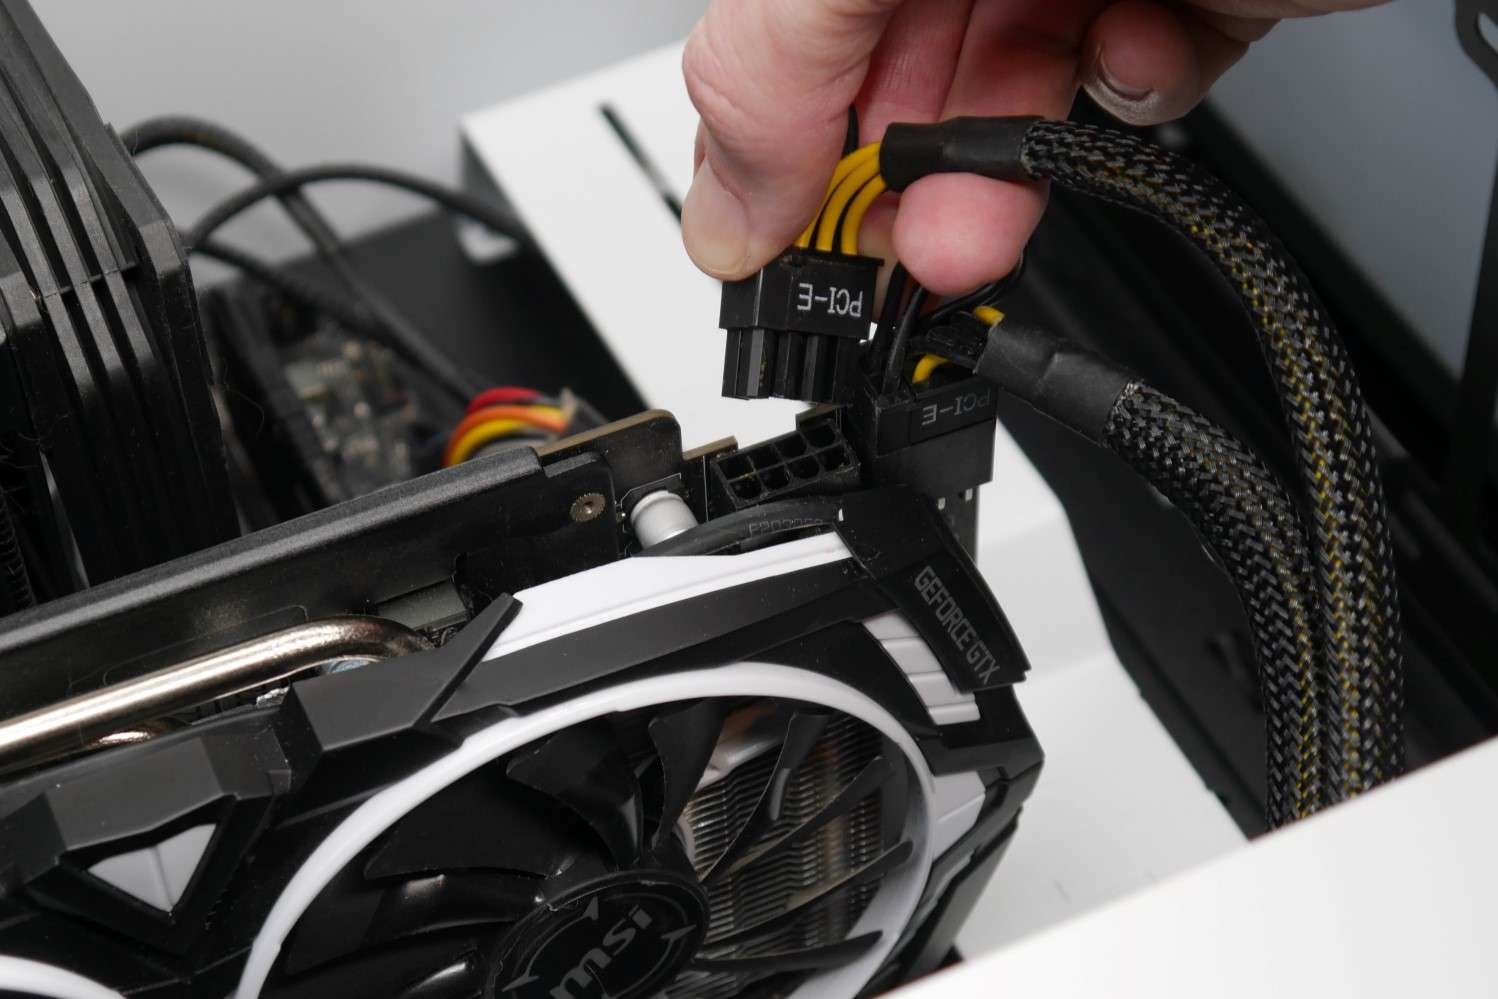 Check if the power supply unit (PSU) is providing enough power to the graphics card.
Verify that all necessary power connectors are securely connected to the graphics card.